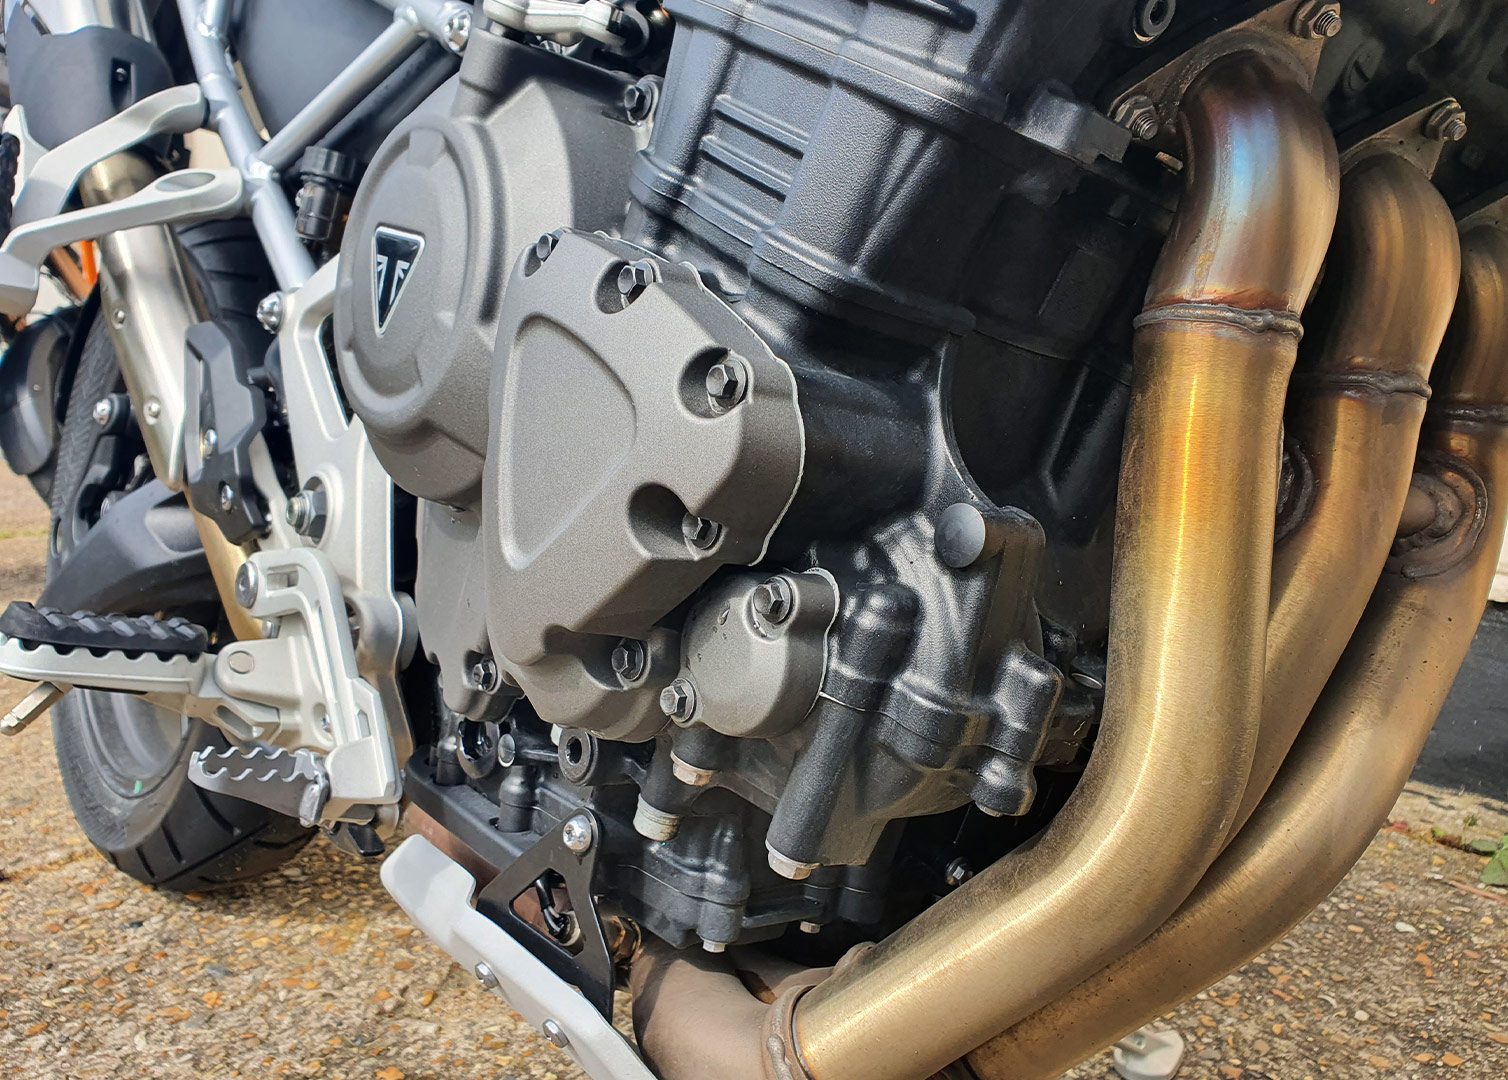 The Tiger 1200 Review - Ryan Insight Engine, Power and Torque